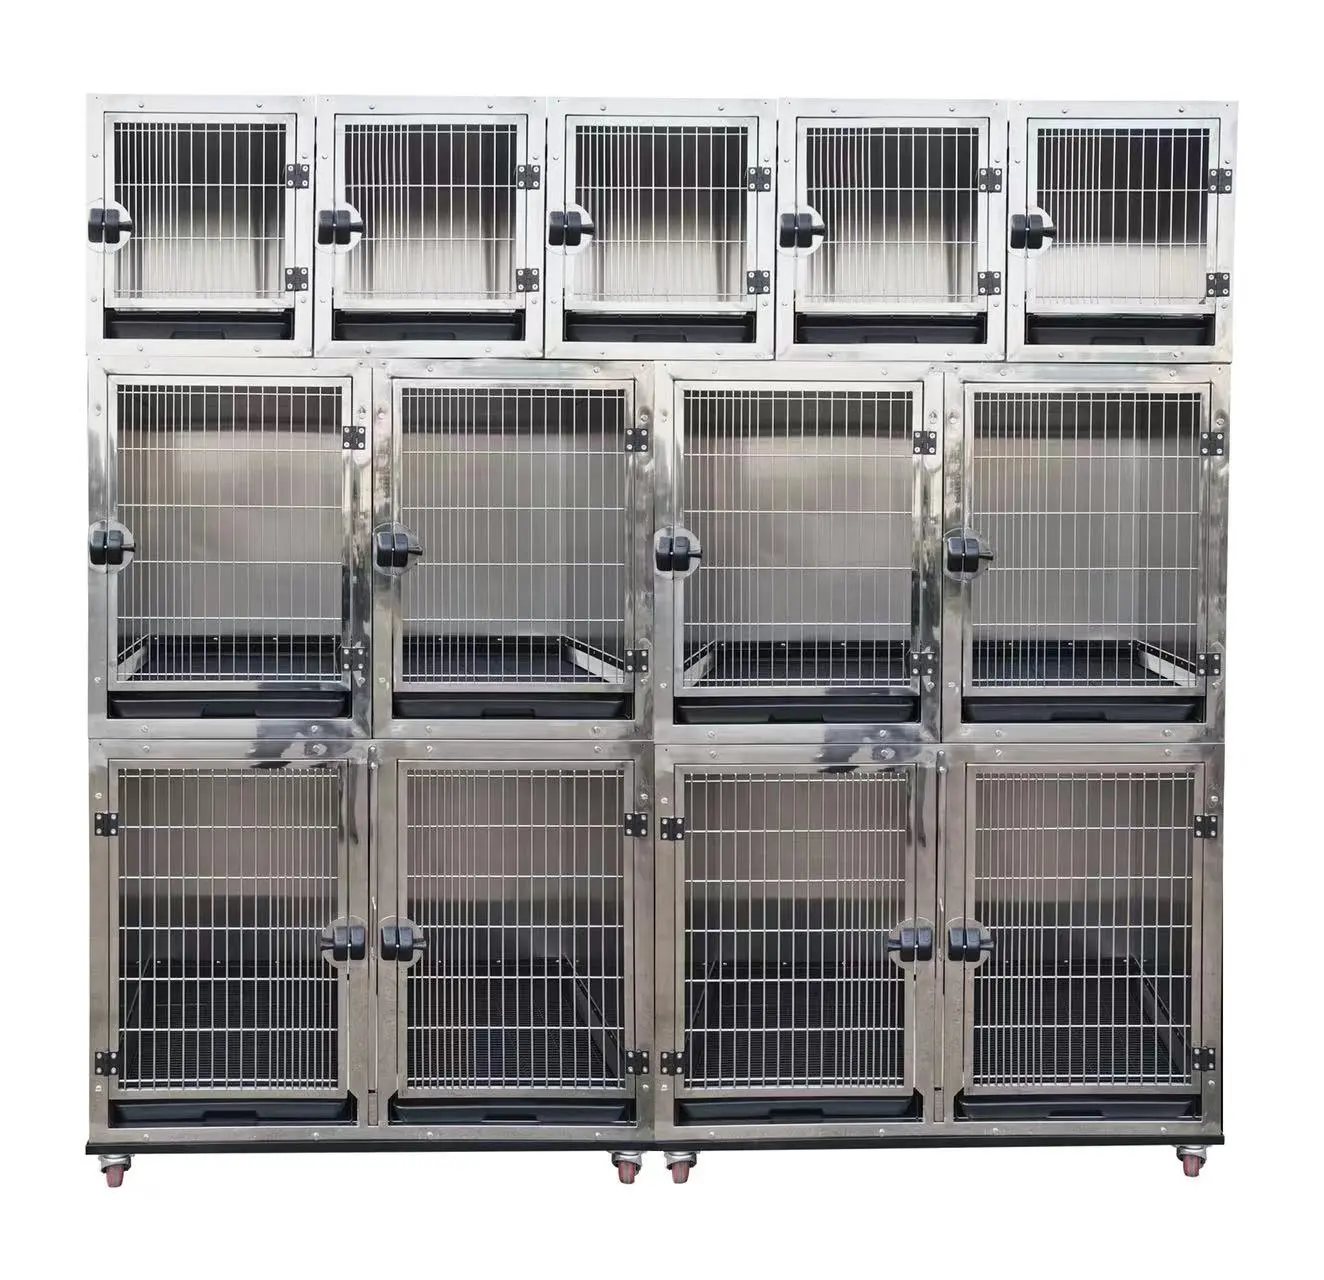 KA-505-201 Heavy Duty Dog Kennel Stainless Steel Pet Modular Cages Crates for Large Dogs